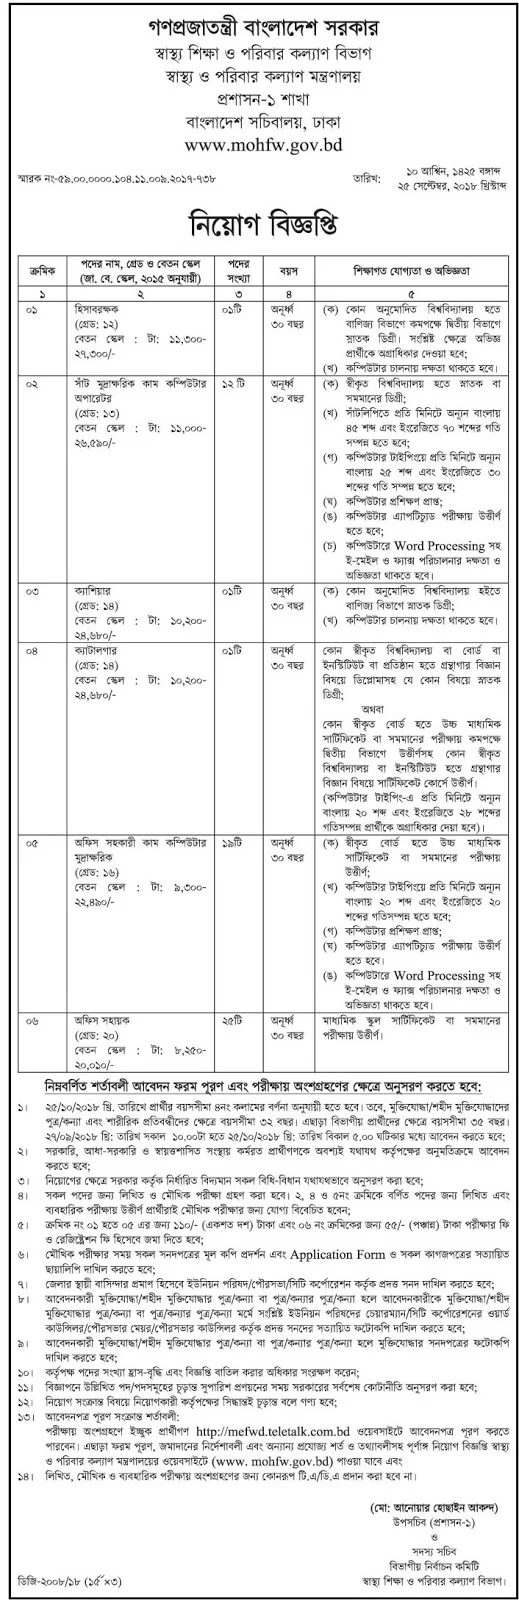 Ministry of Health and Family Welfare (MOHFW) Job Circular 2018